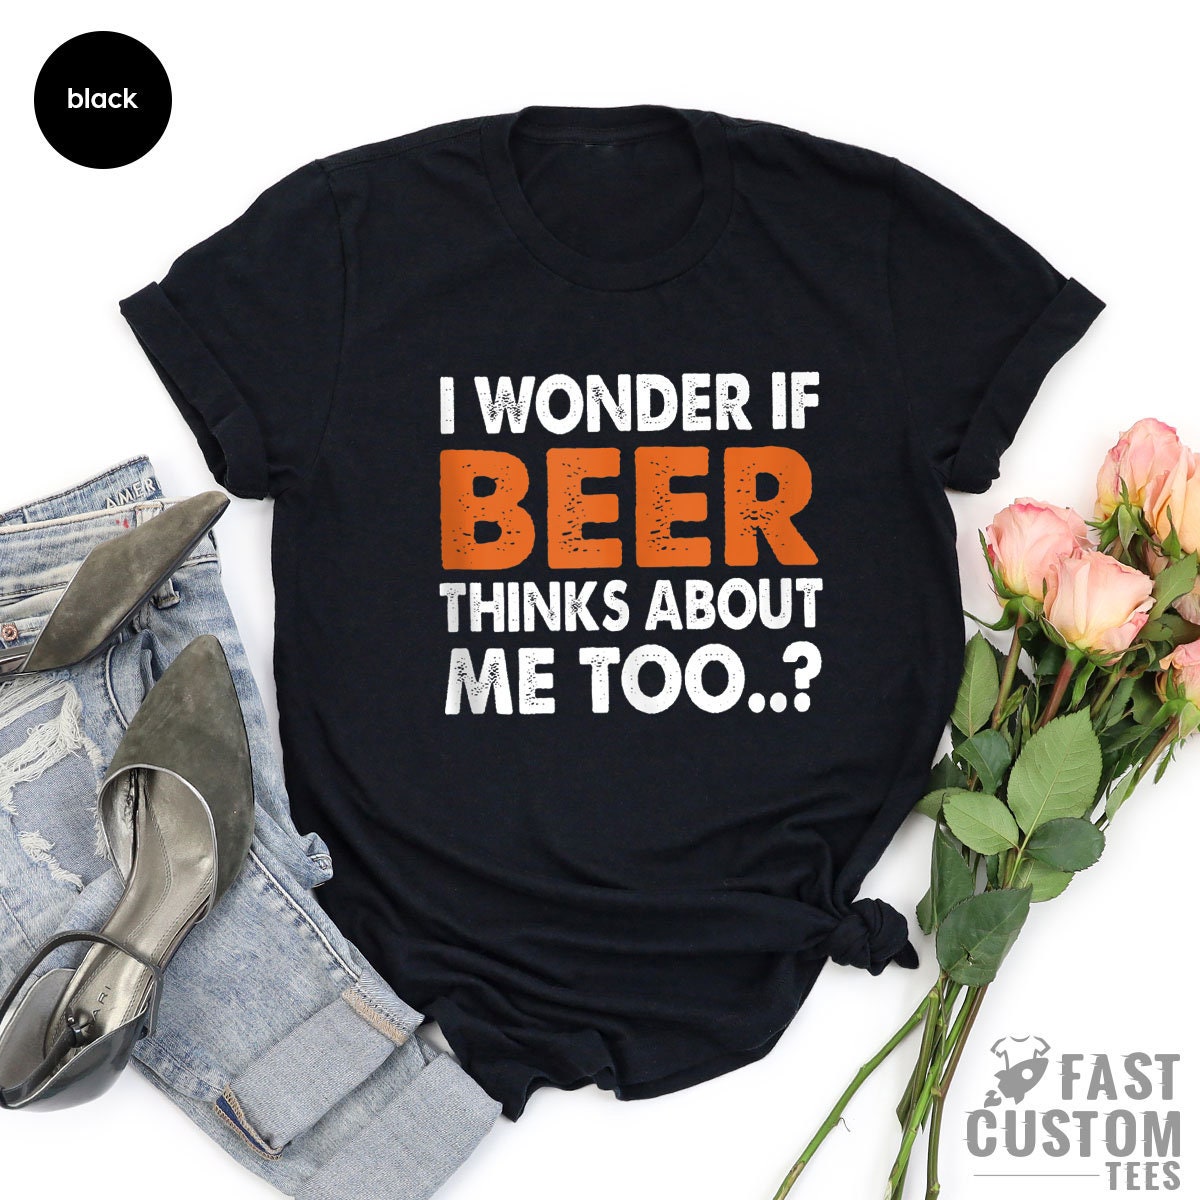 Funny Beer Shirt, I Wonder If Beer Thinks About Me Too, Day Drinking Shirts, Beer Quotes Tee, St Patricks Day Shirt, Funny Drinking Shirts - Fastdeliverytees.com